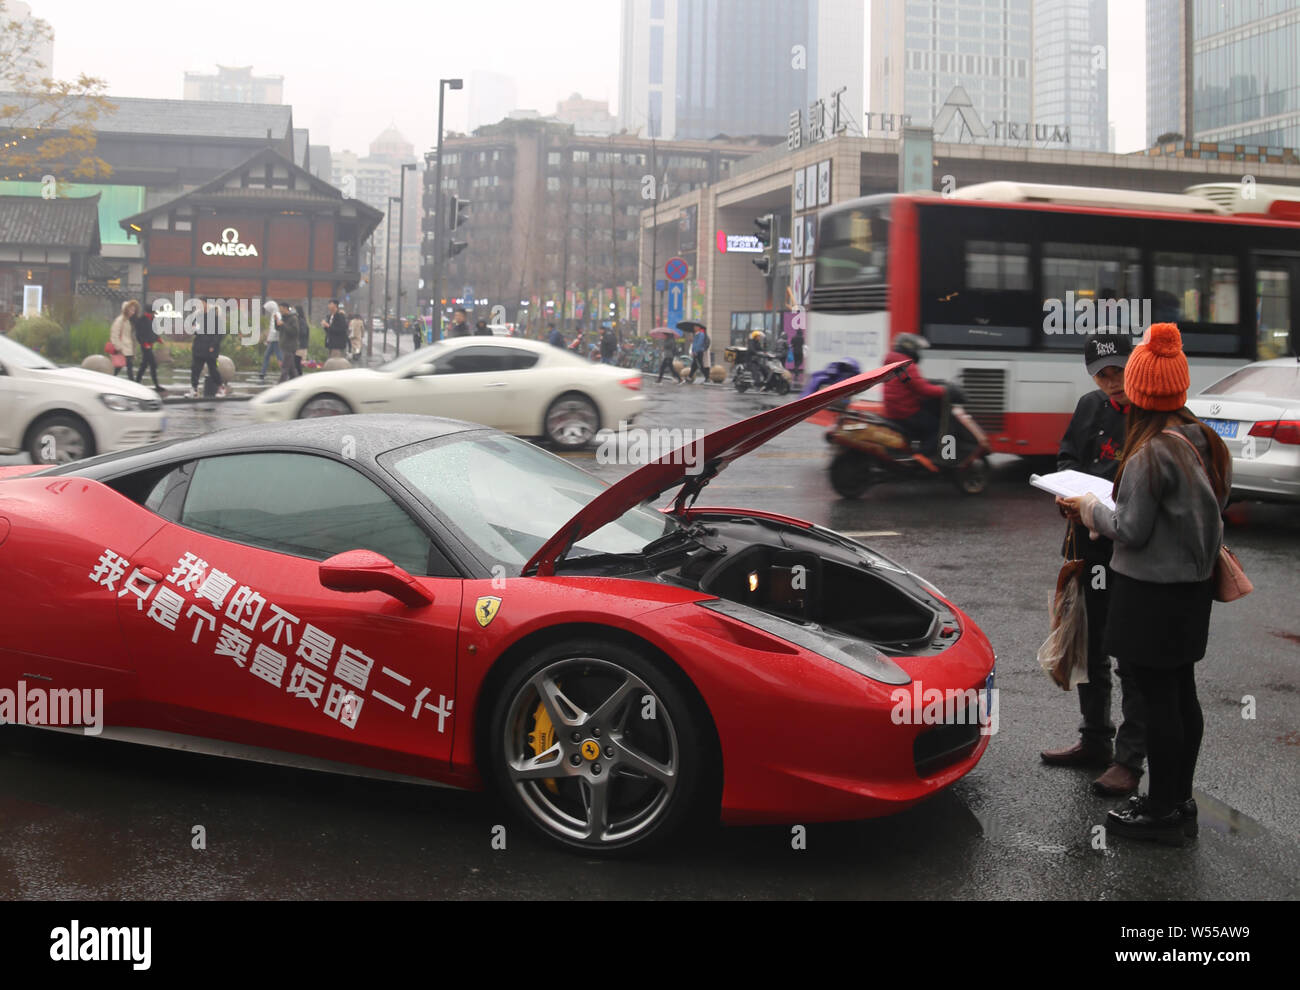 A food store owner drives a luxury Ferrari sports car to deliver meals to customers in downtown Chengdu city, southwest China's Sichuan province, 24 F Stock Photo